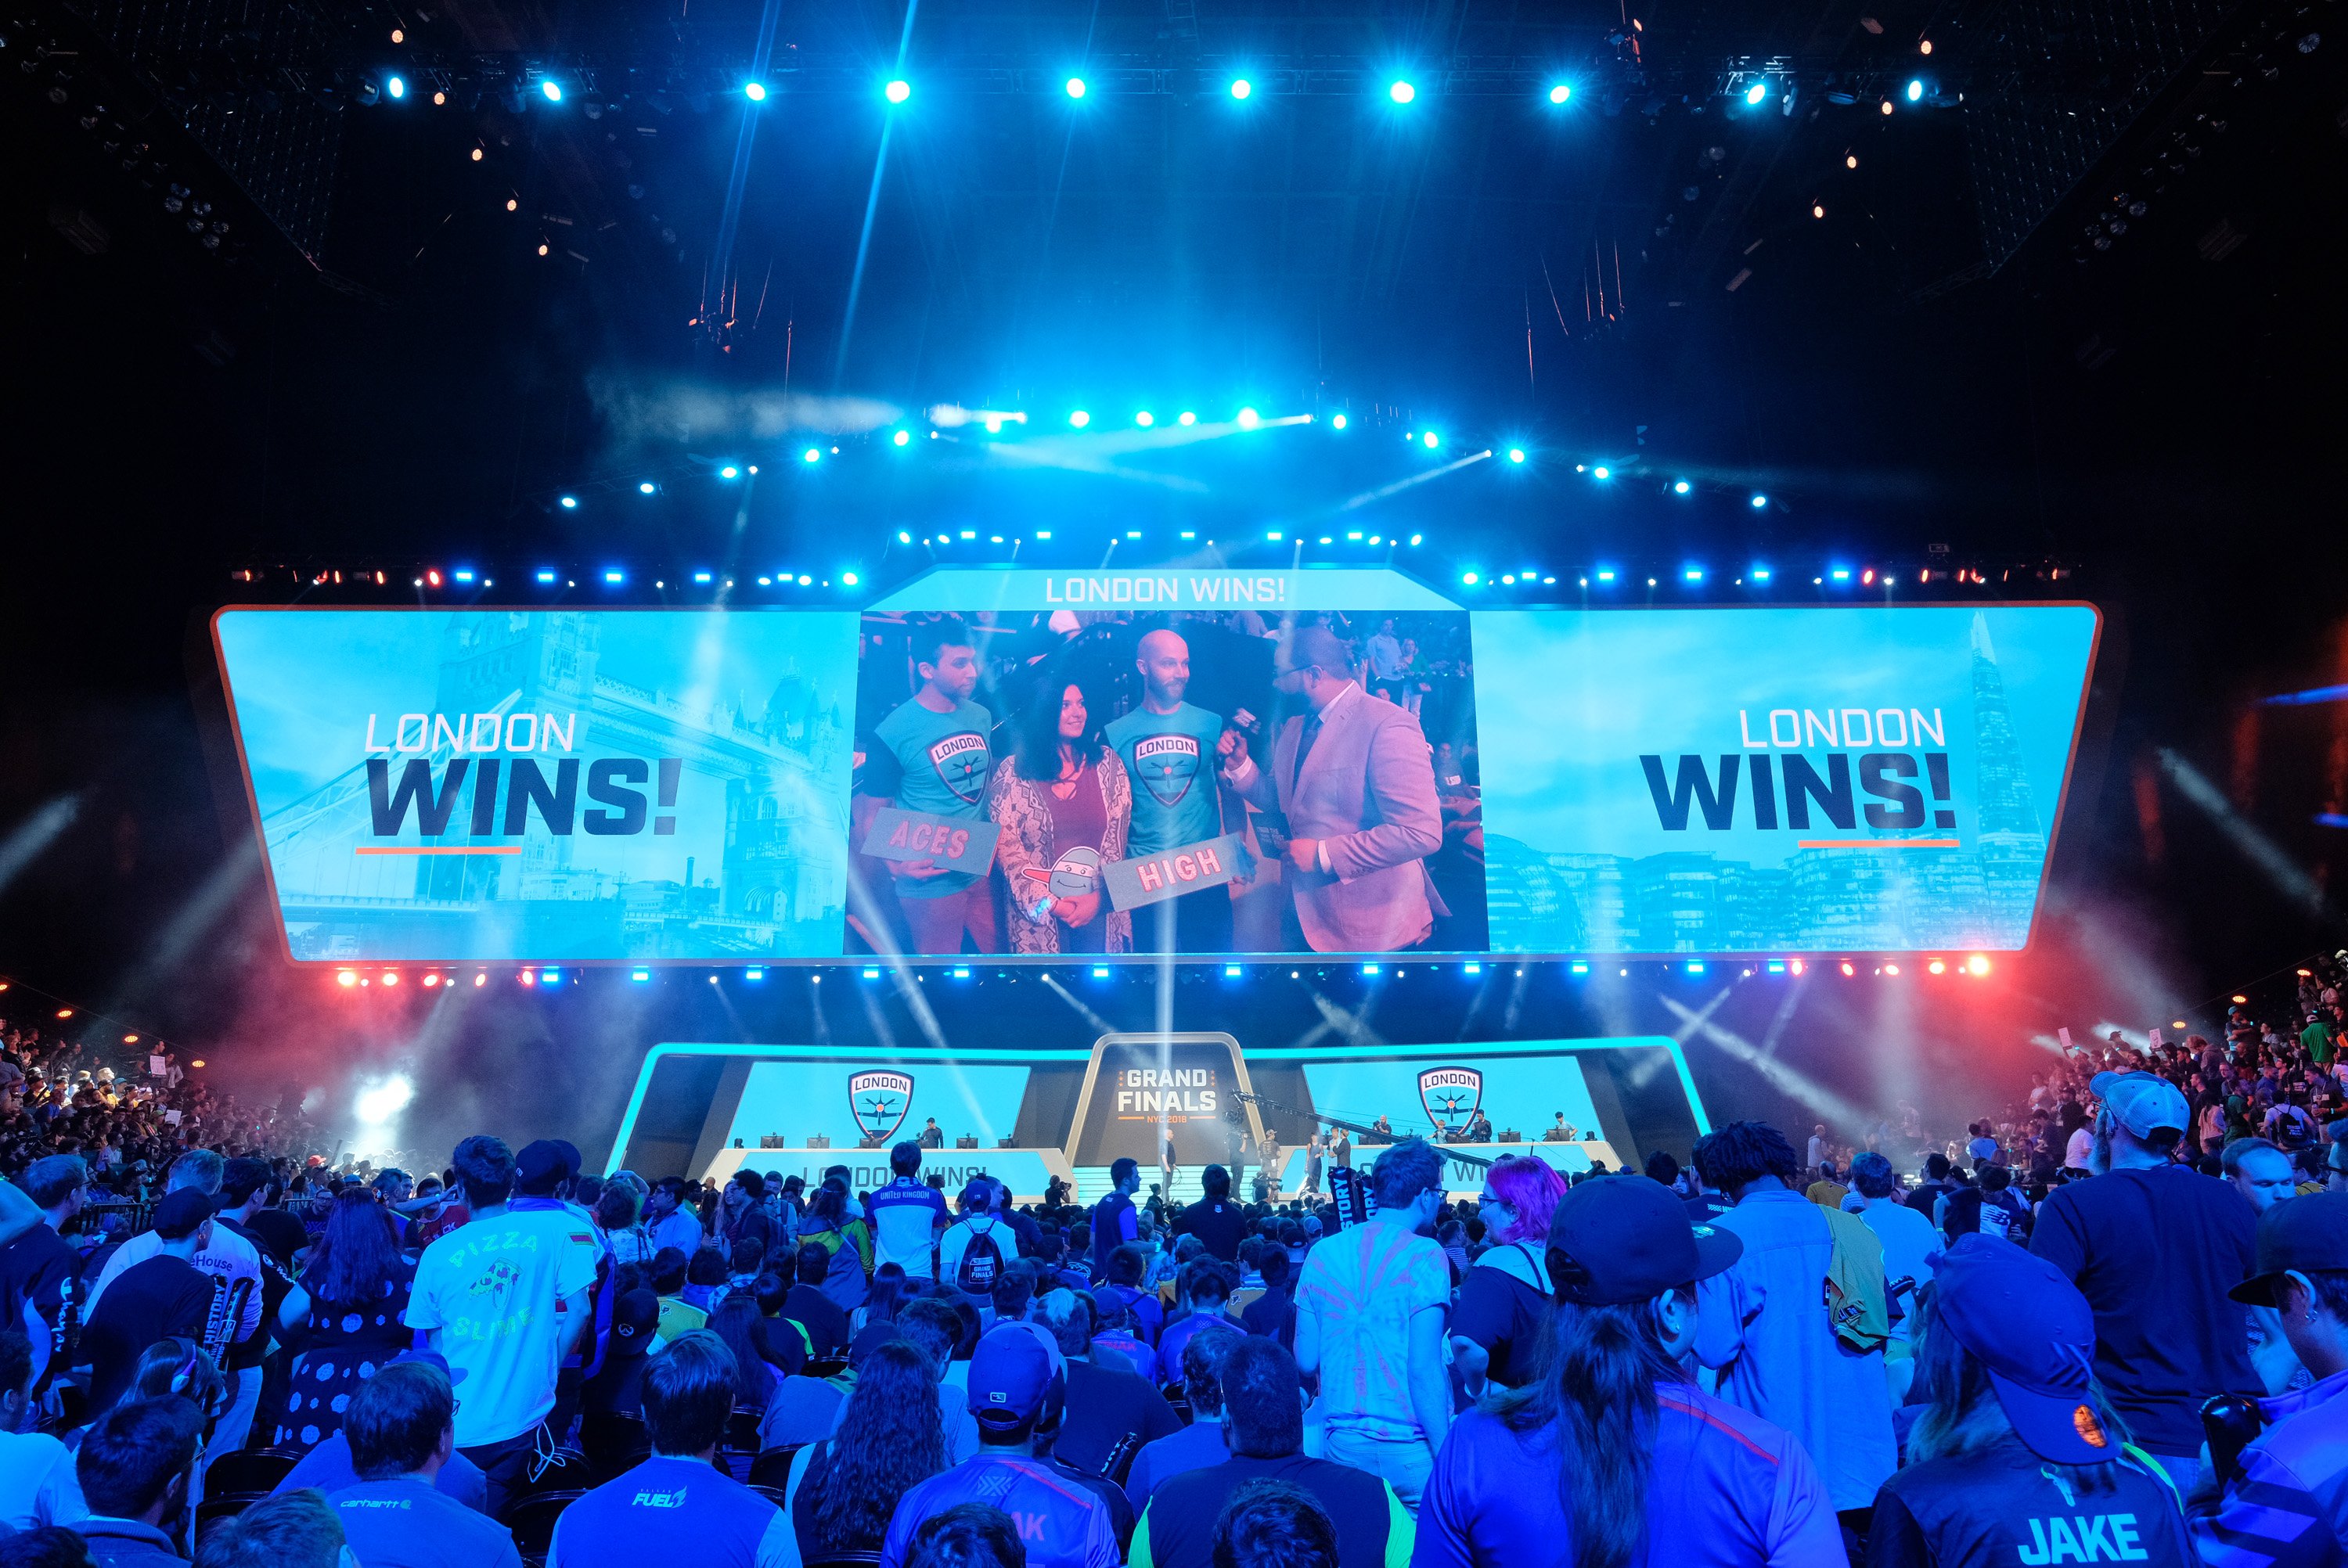 London Spitfire wins during the Overwatch League Grand Finals in 2018.